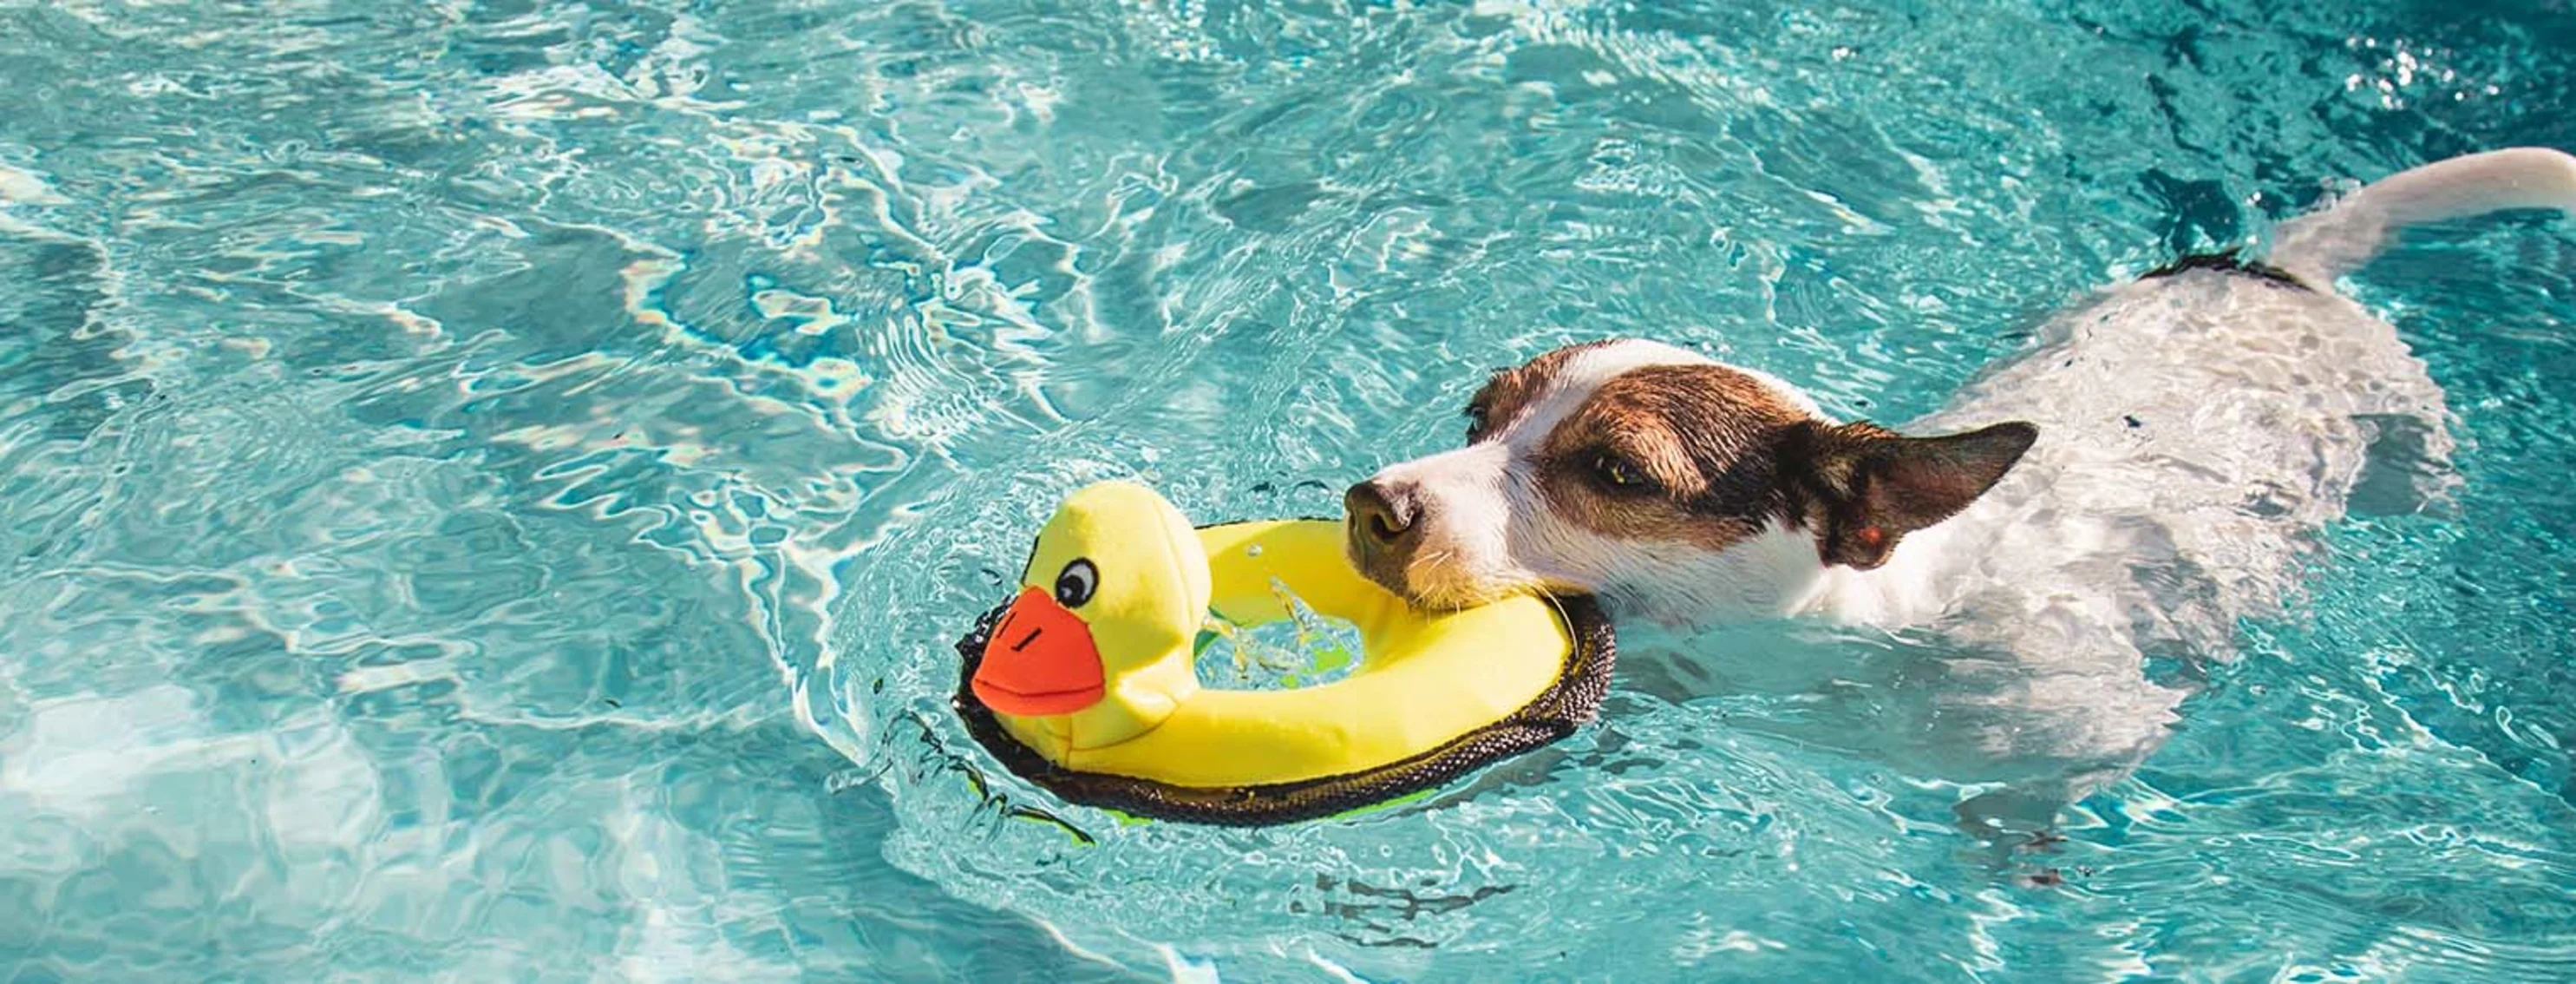 Dog playing with a toy in the pool